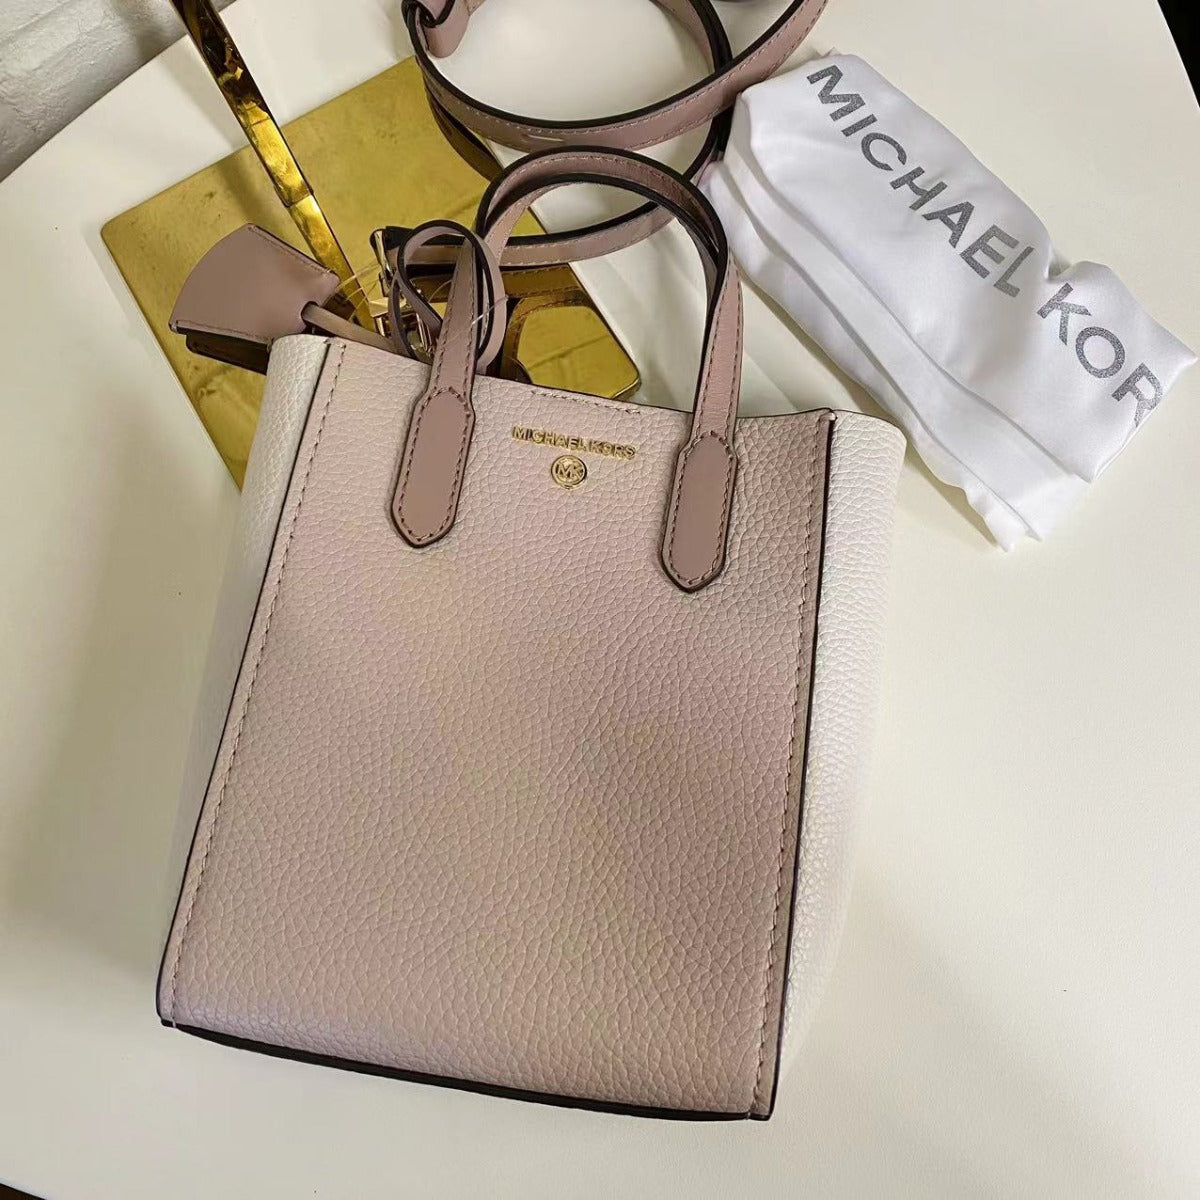 Michael Kors 32T1G5SC0T Sinclair Extra-Small Pebbled Leather Crossbody Bag In SFP/LTCR/FWN